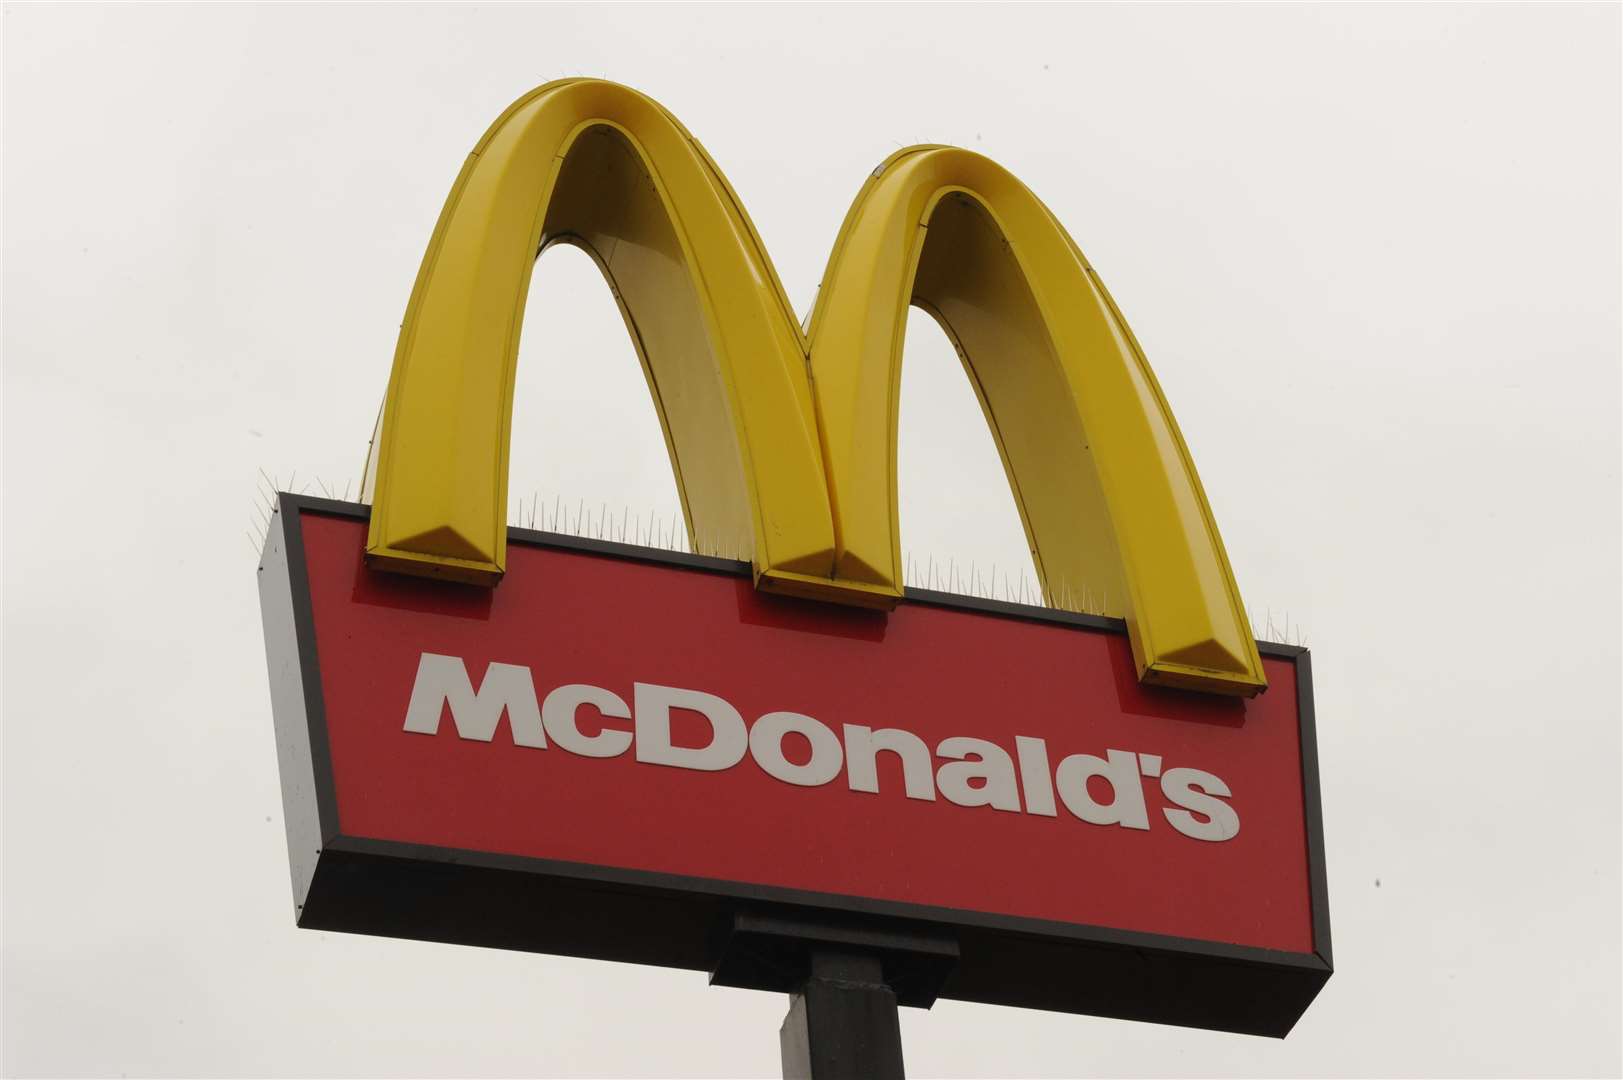 Armed police were called to the McDonald's